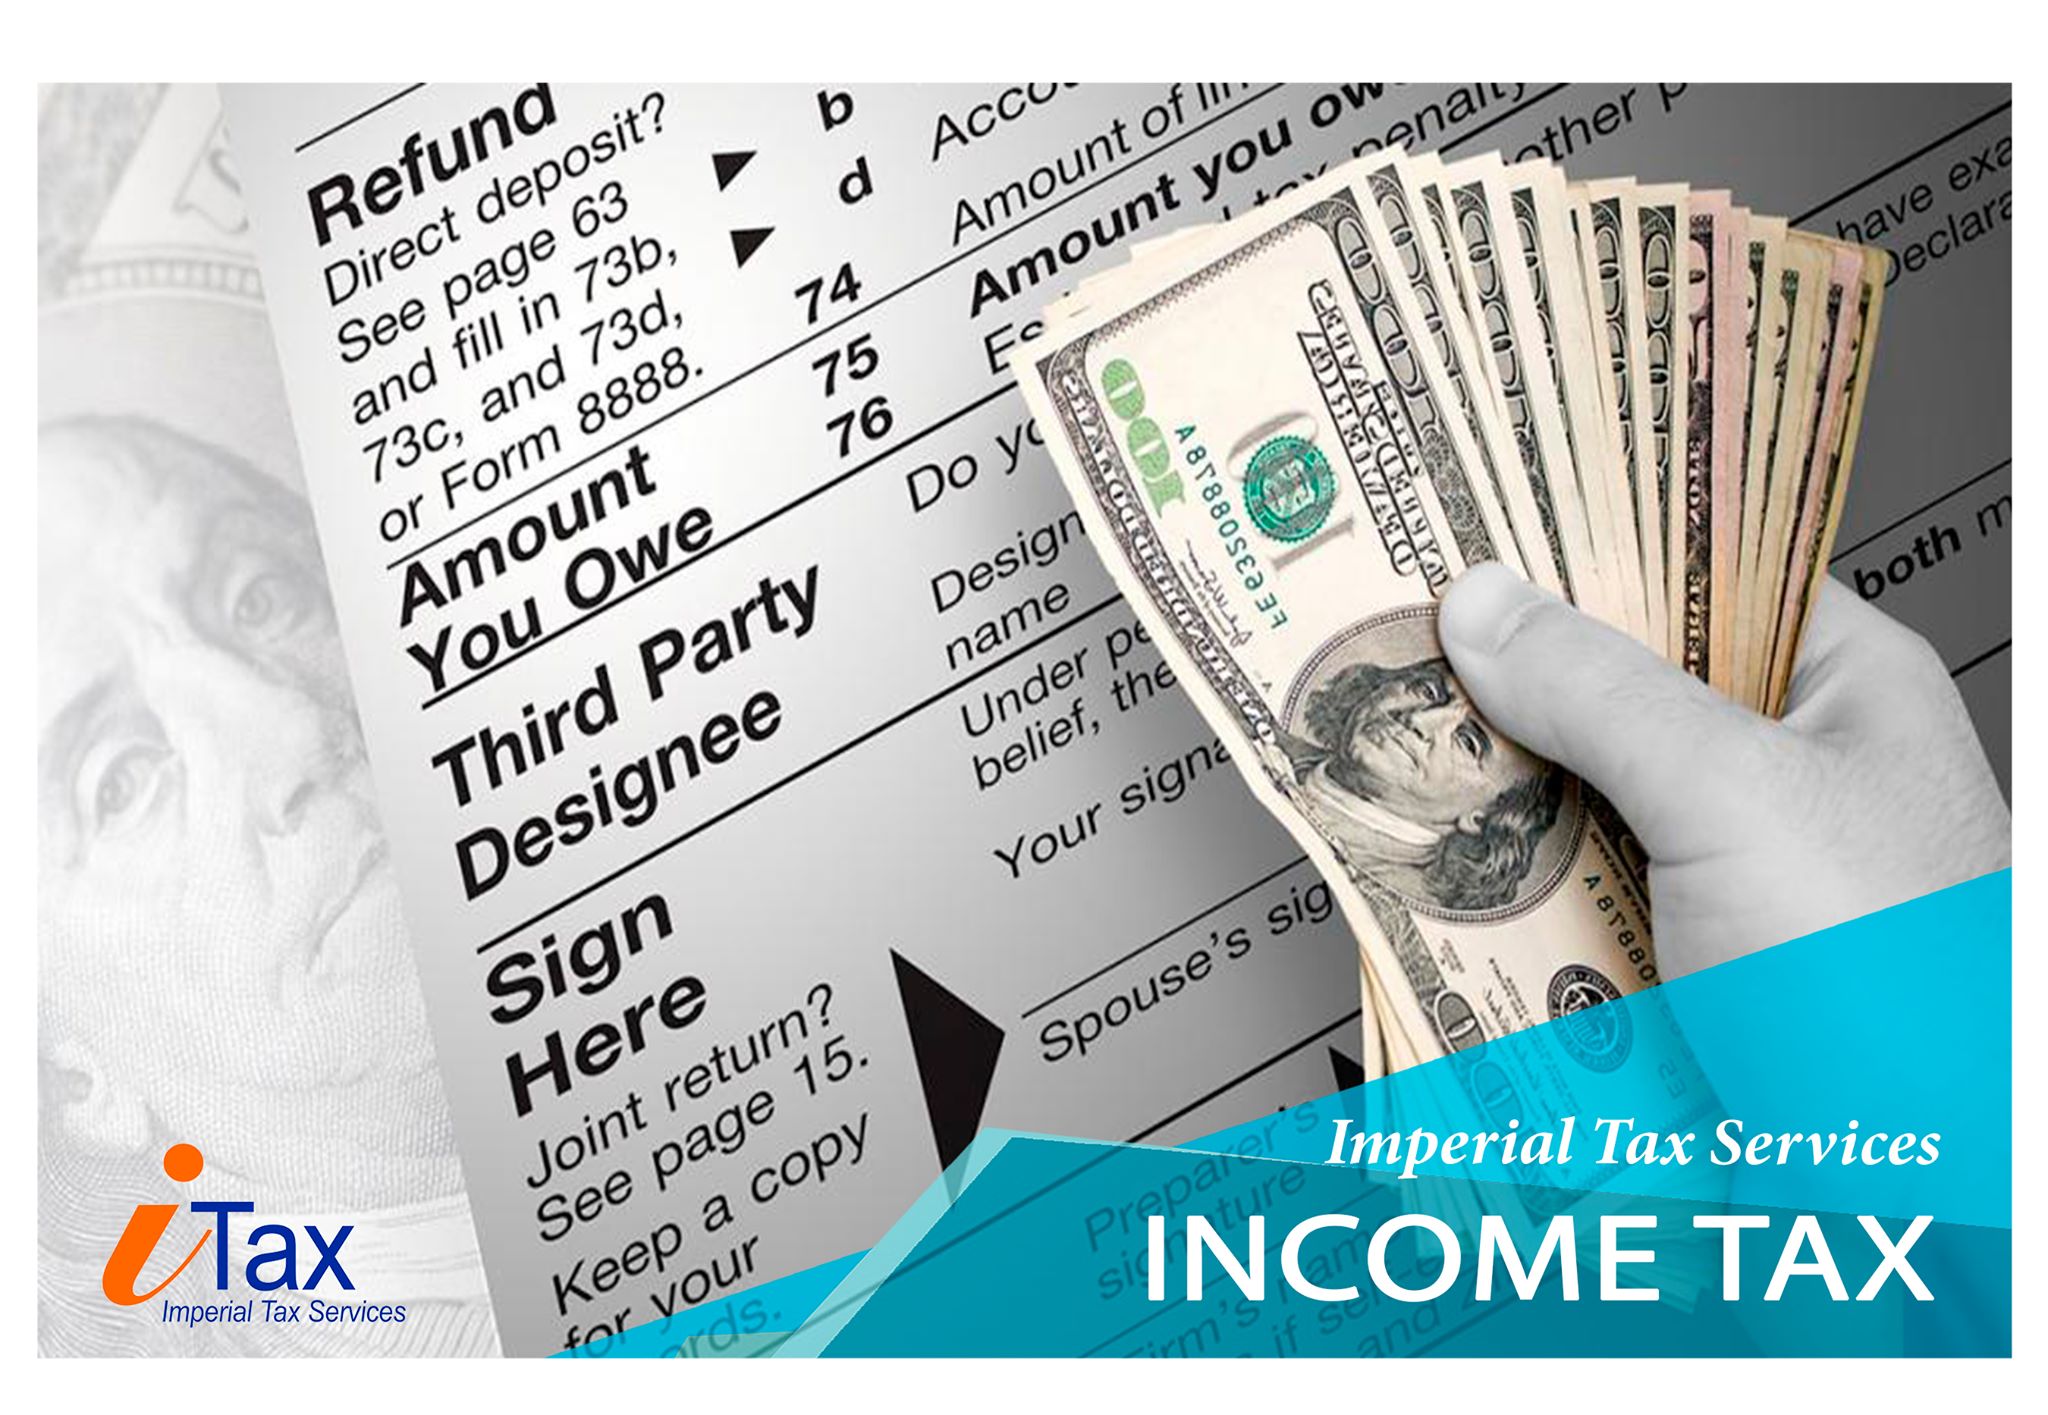 Imperial Tax Services